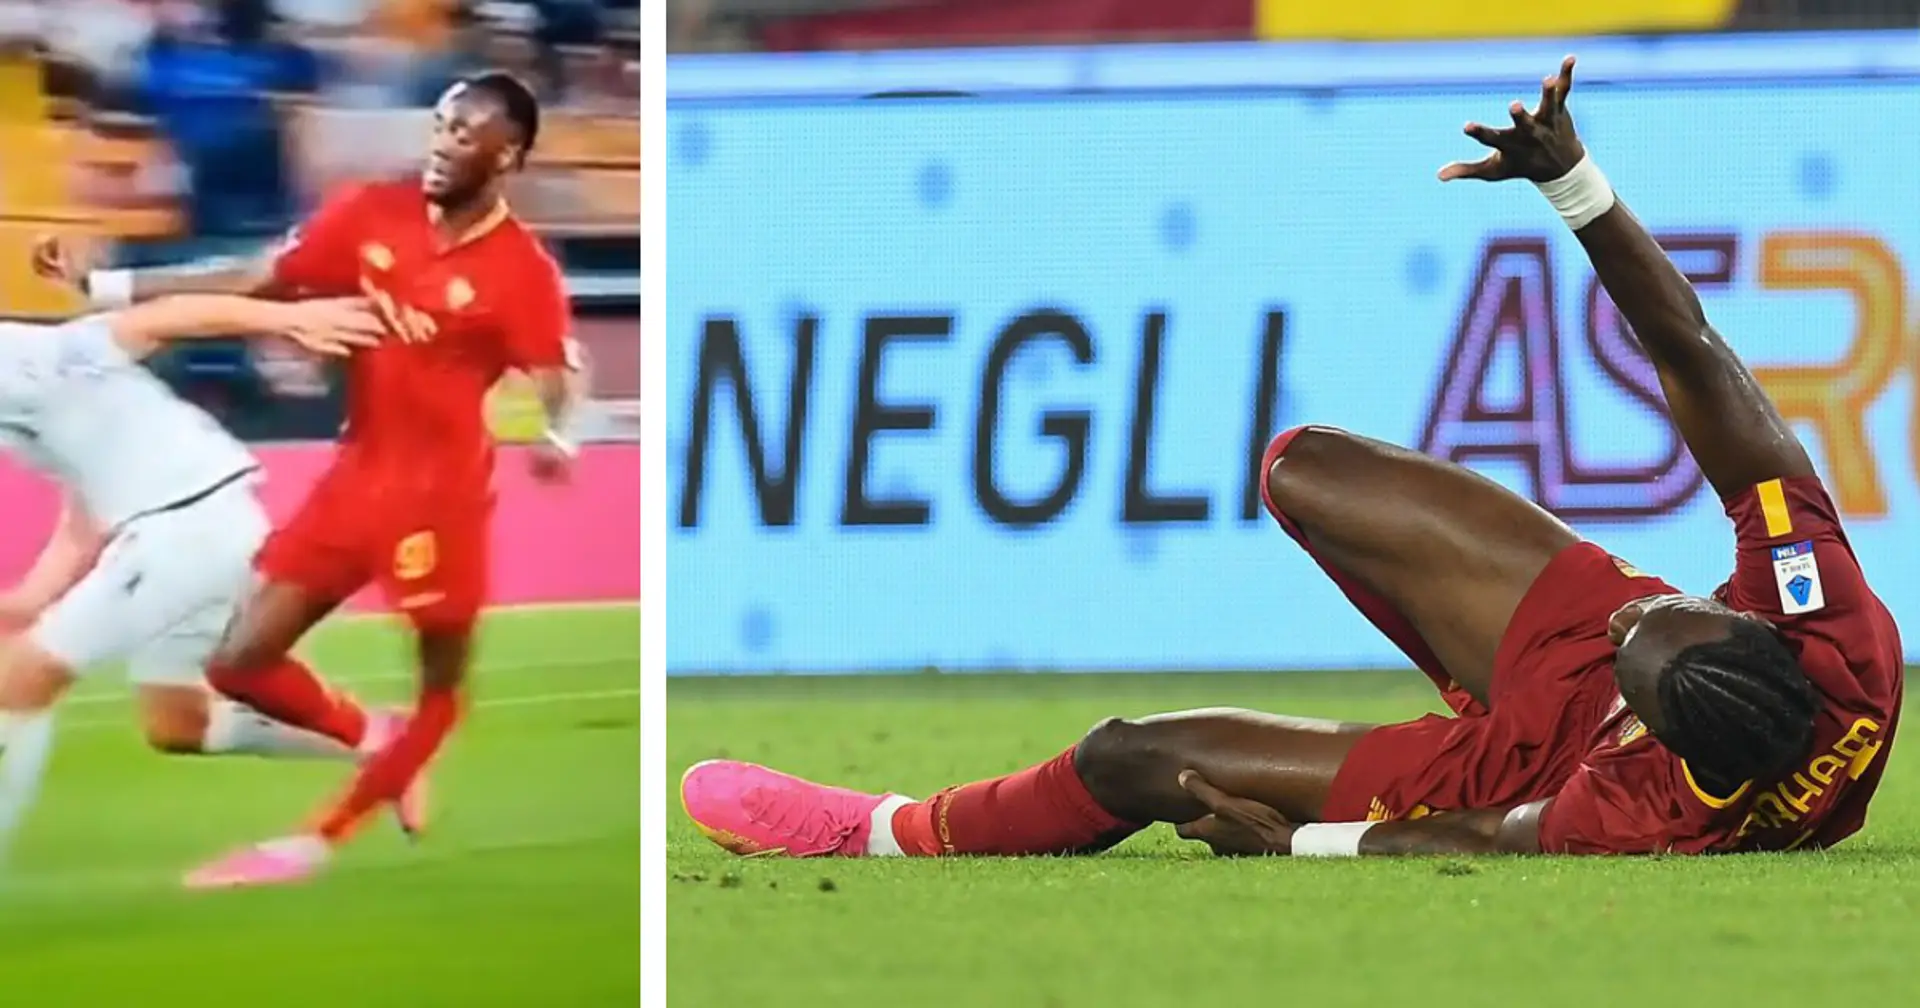 Tammy Abraham suffers ACL injury while pushing former Chelsea teammate, likely to miss up to 9 months